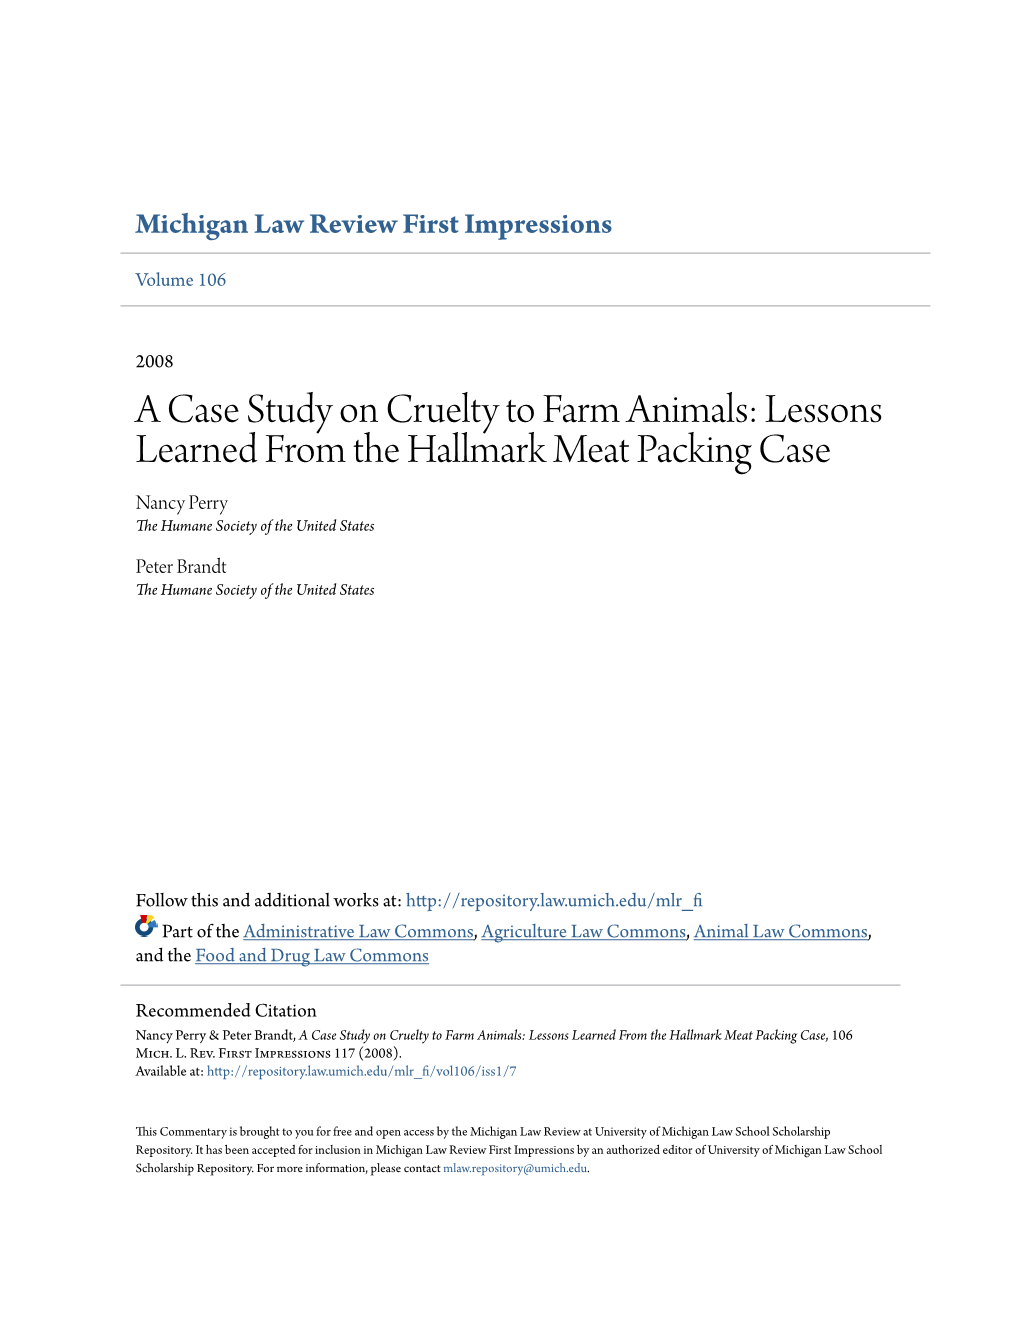 A Case Study on Cruelty to Farm Animals: Lessons Learned from the Hallmark Meat Packing Case Nancy Perry the Humane Society of the United States